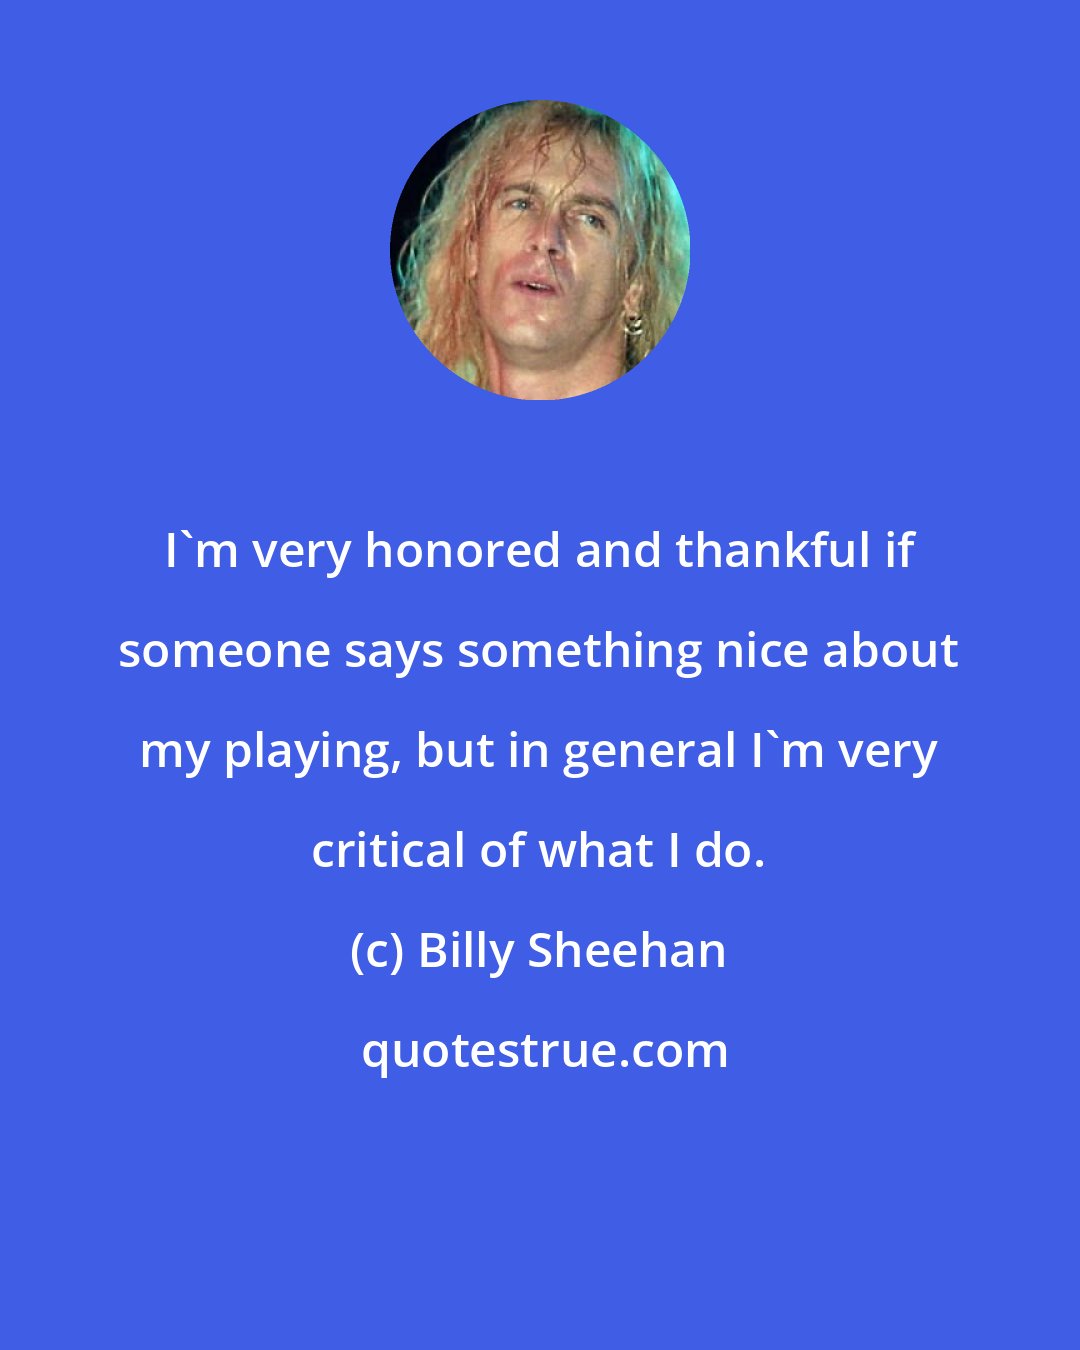 Billy Sheehan: I'm very honored and thankful if someone says something nice about my playing, but in general I'm very critical of what I do.